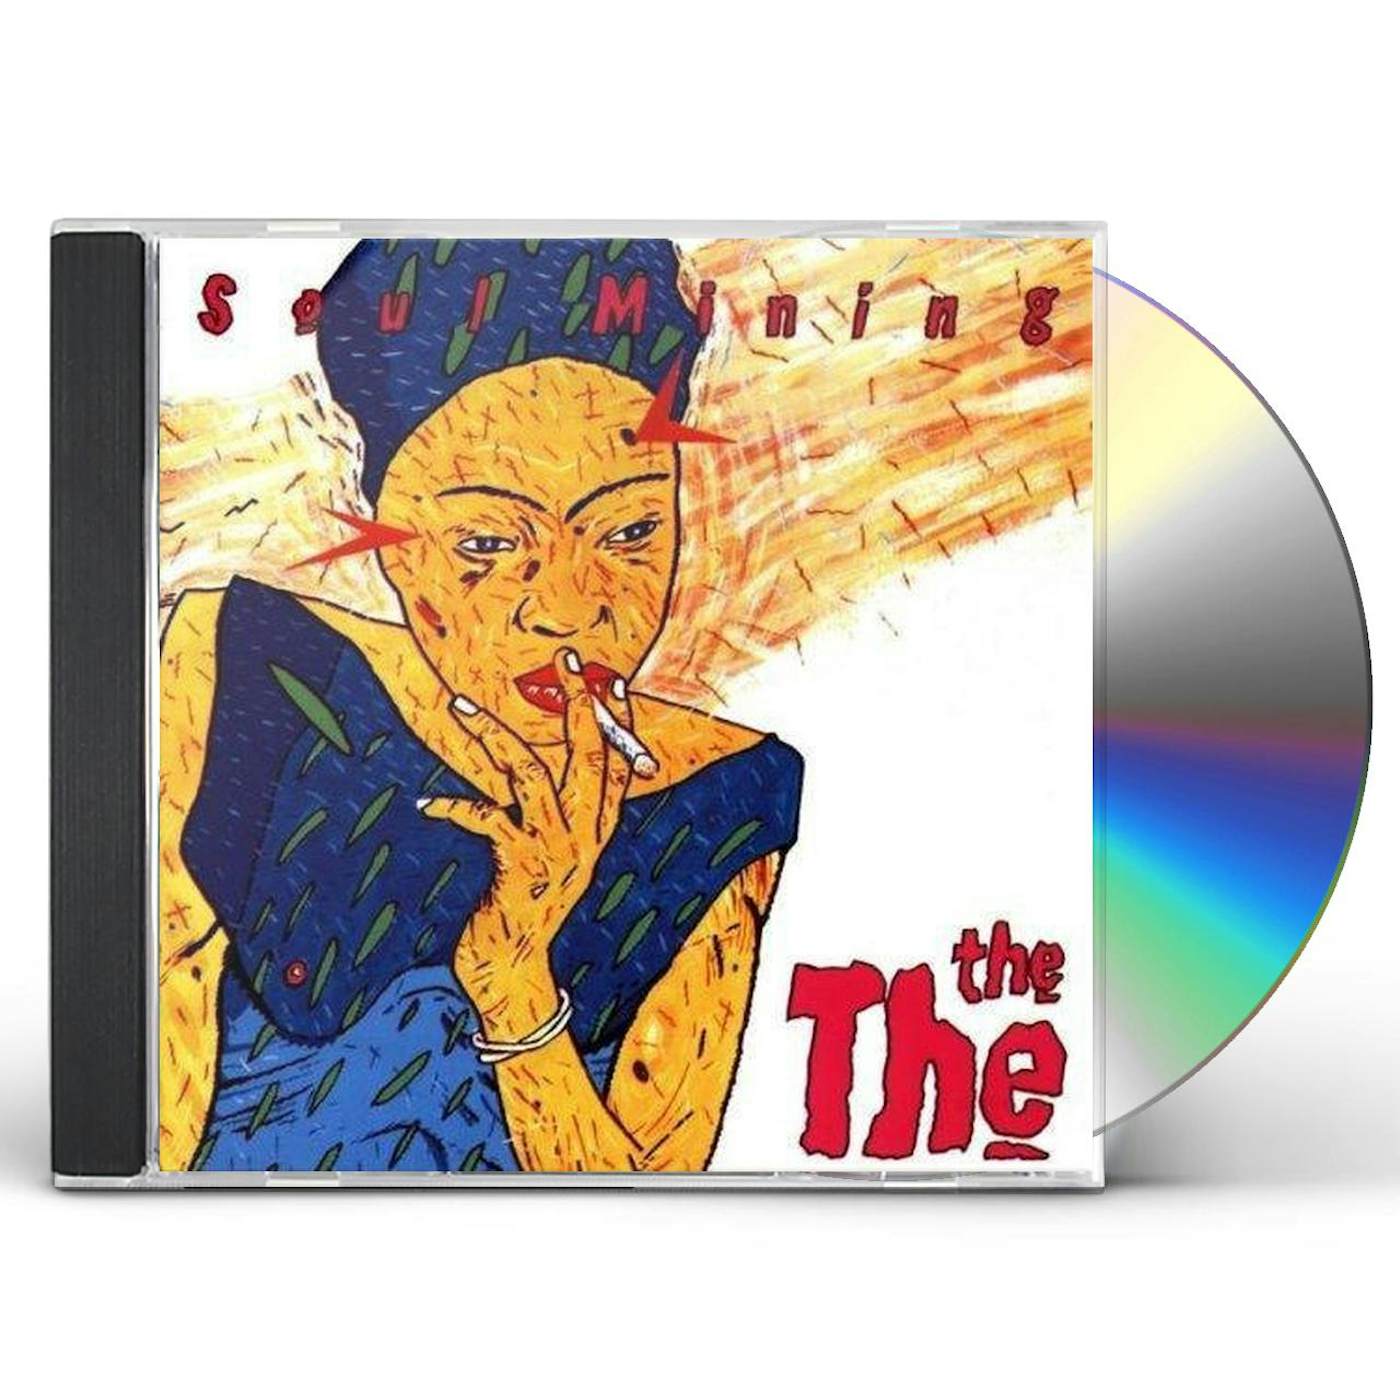 The The SOUL MINING CD